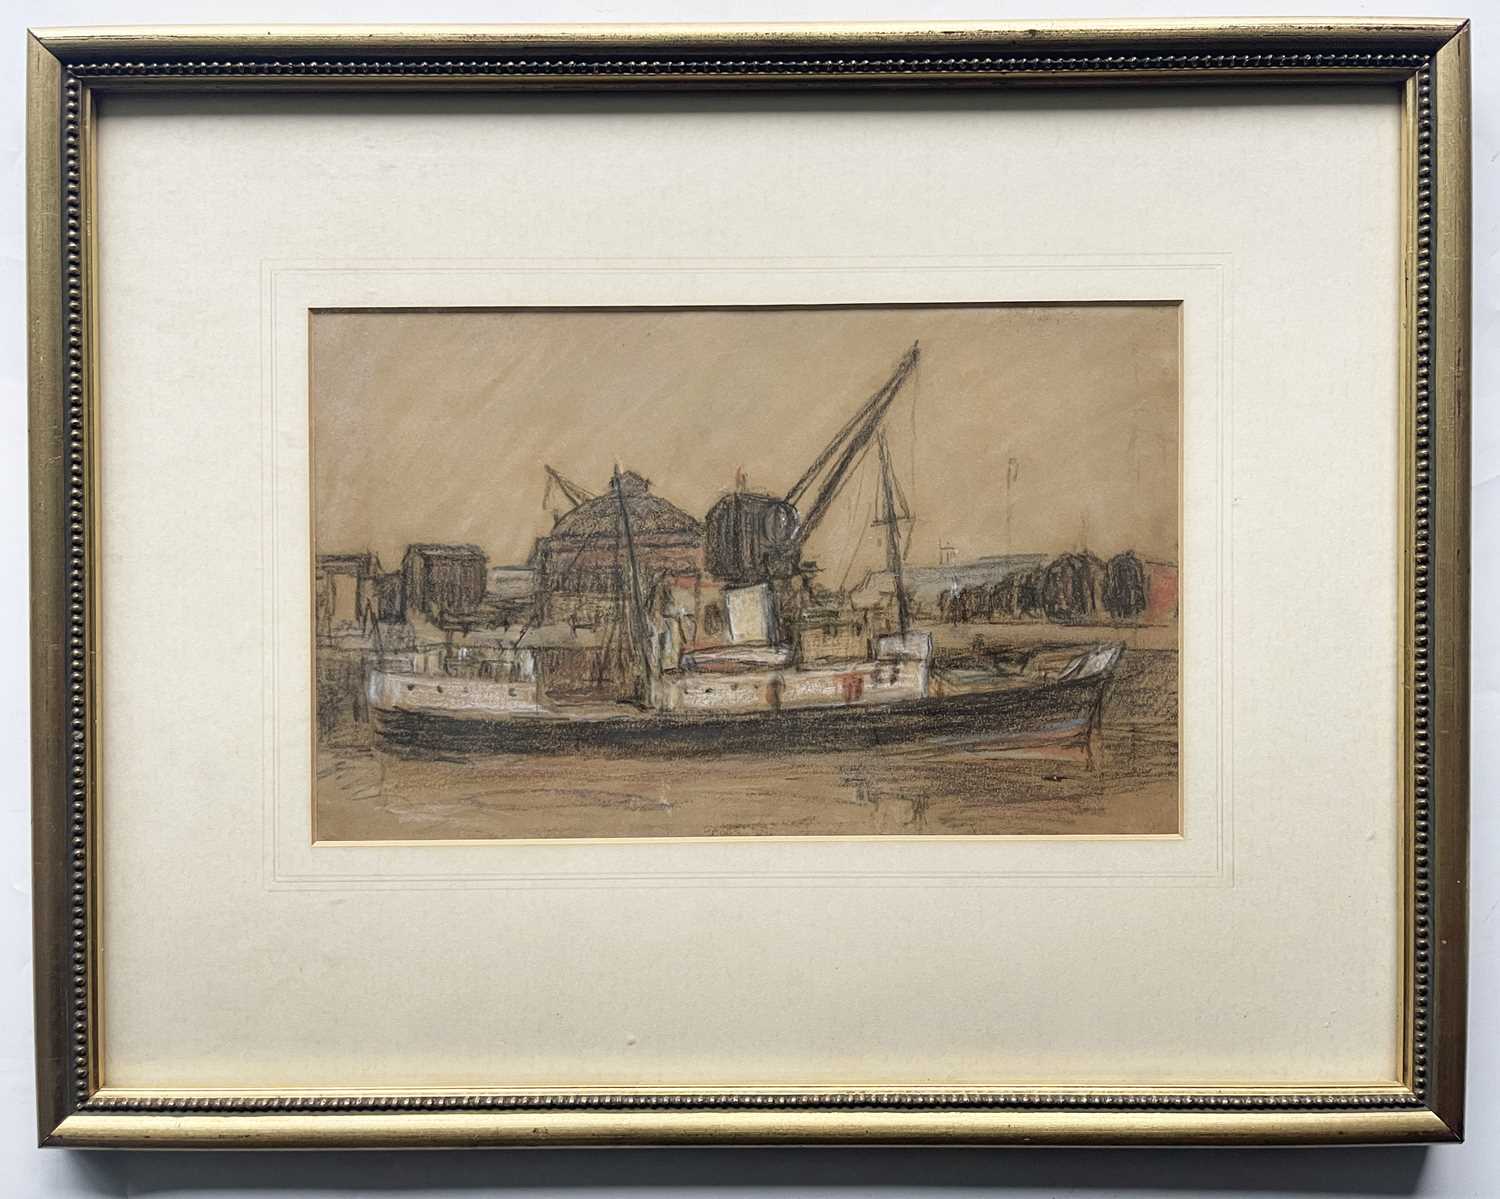 William Frederick Timmins (American, 1915-1985), 'Steamer on the Clyde', titled verso, pastel, 18 by - Image 2 of 3